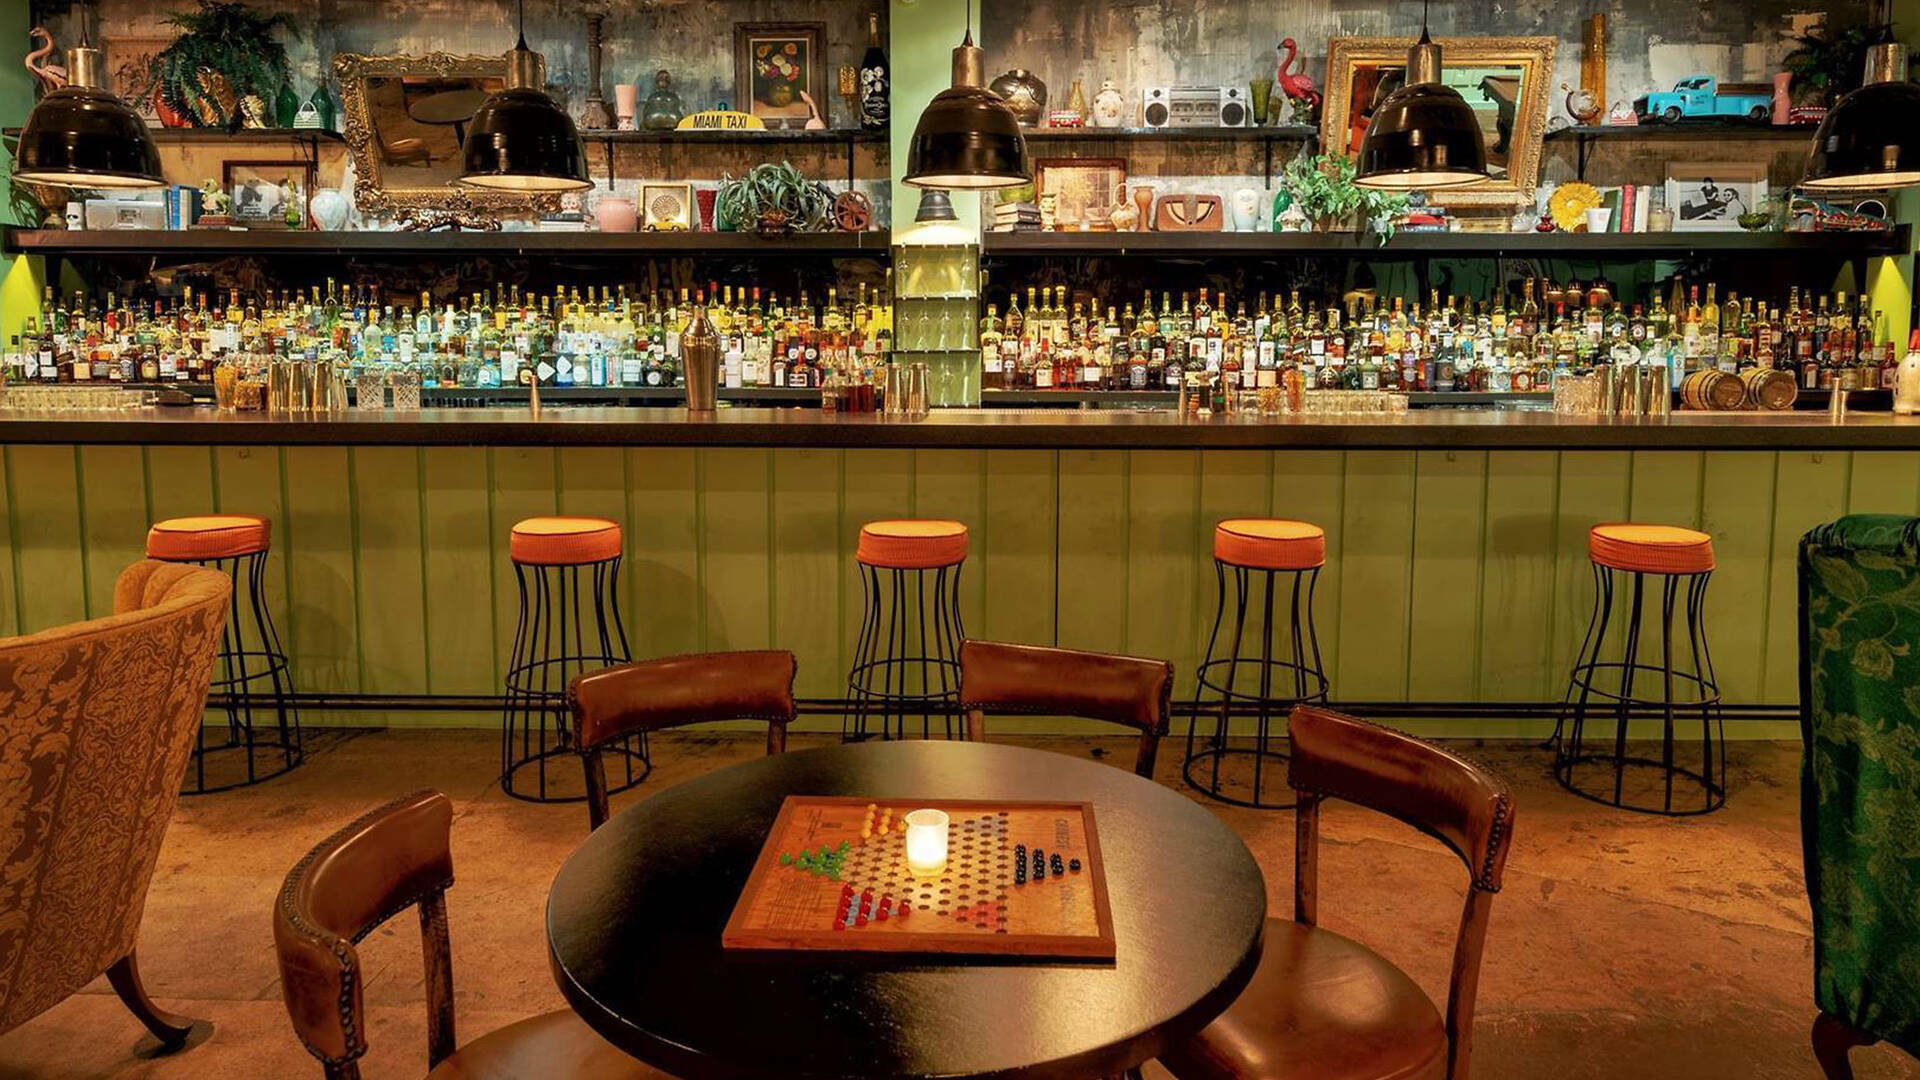 35 Hidden Bars Around the World and How to Find Them